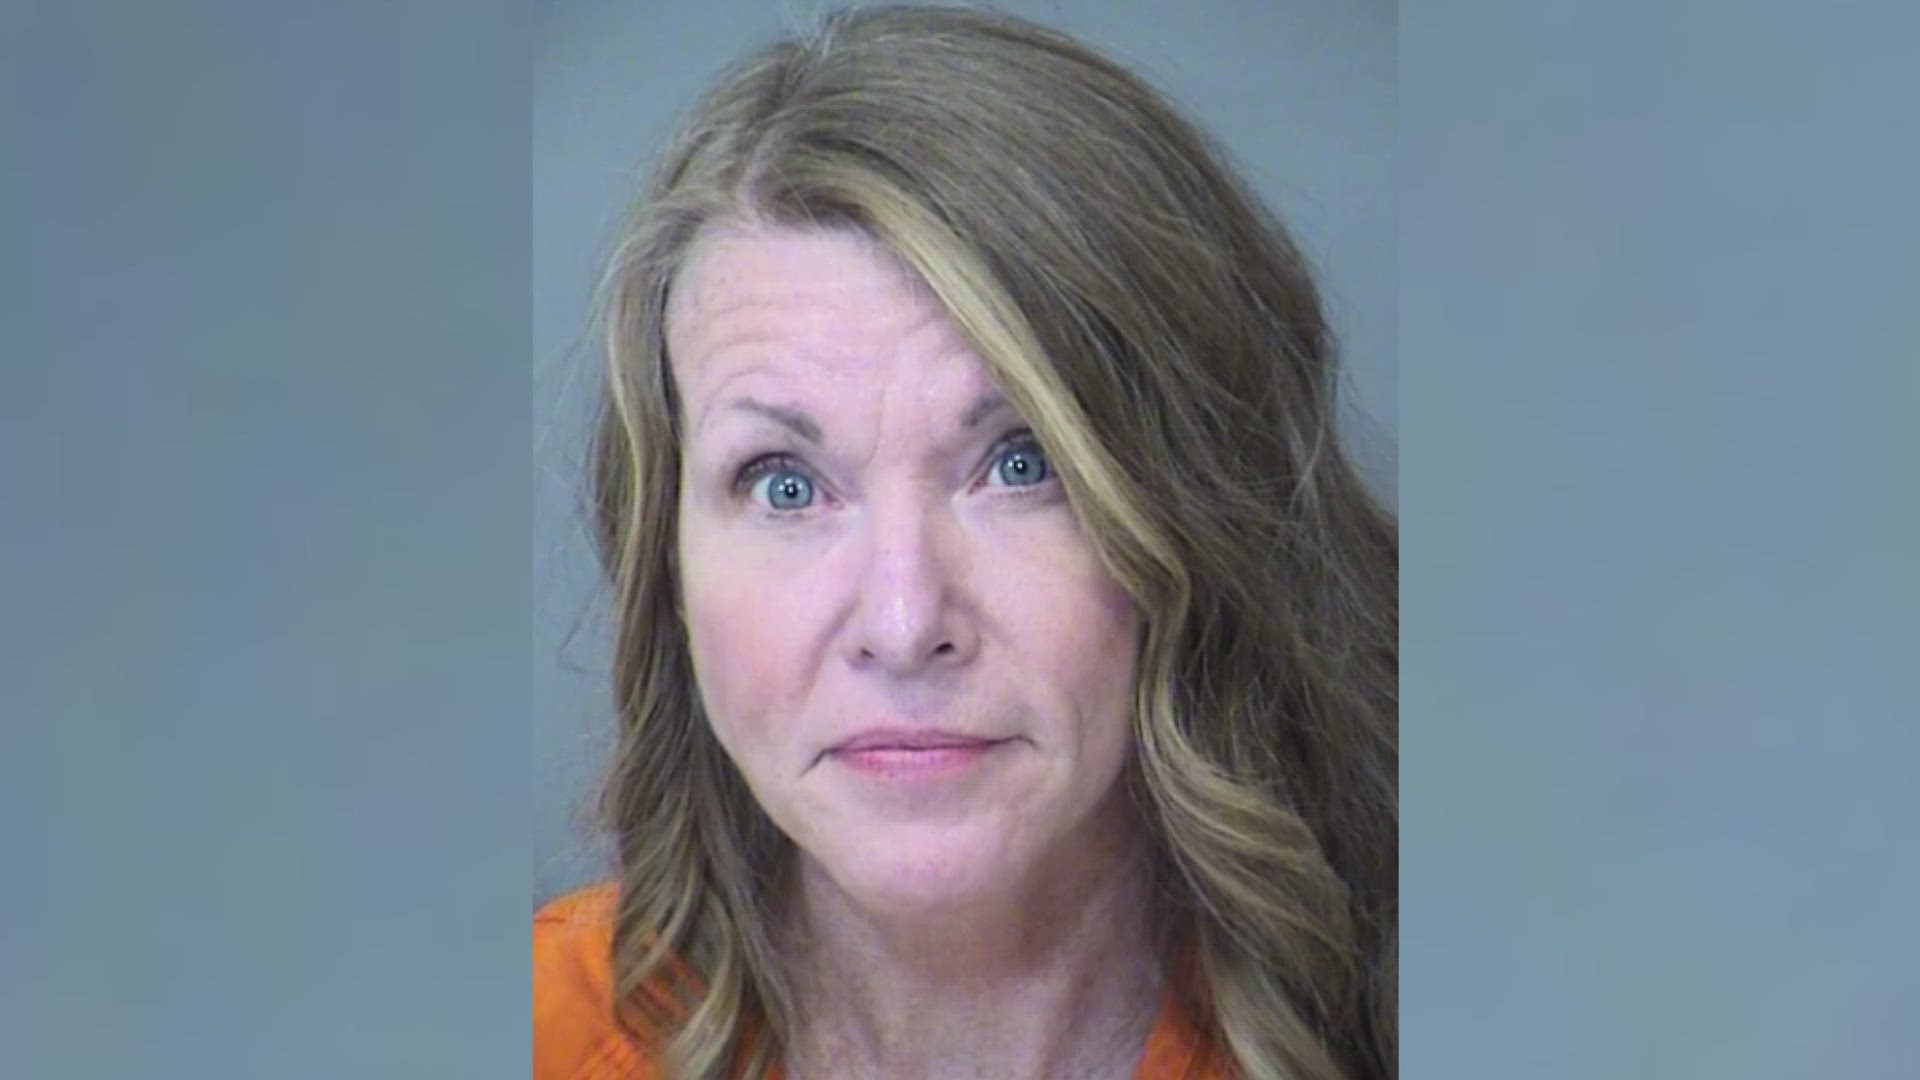 Lori Vallow Daybell is facing multiple homicide charges in Arizona after she was found guilty in Idaho.